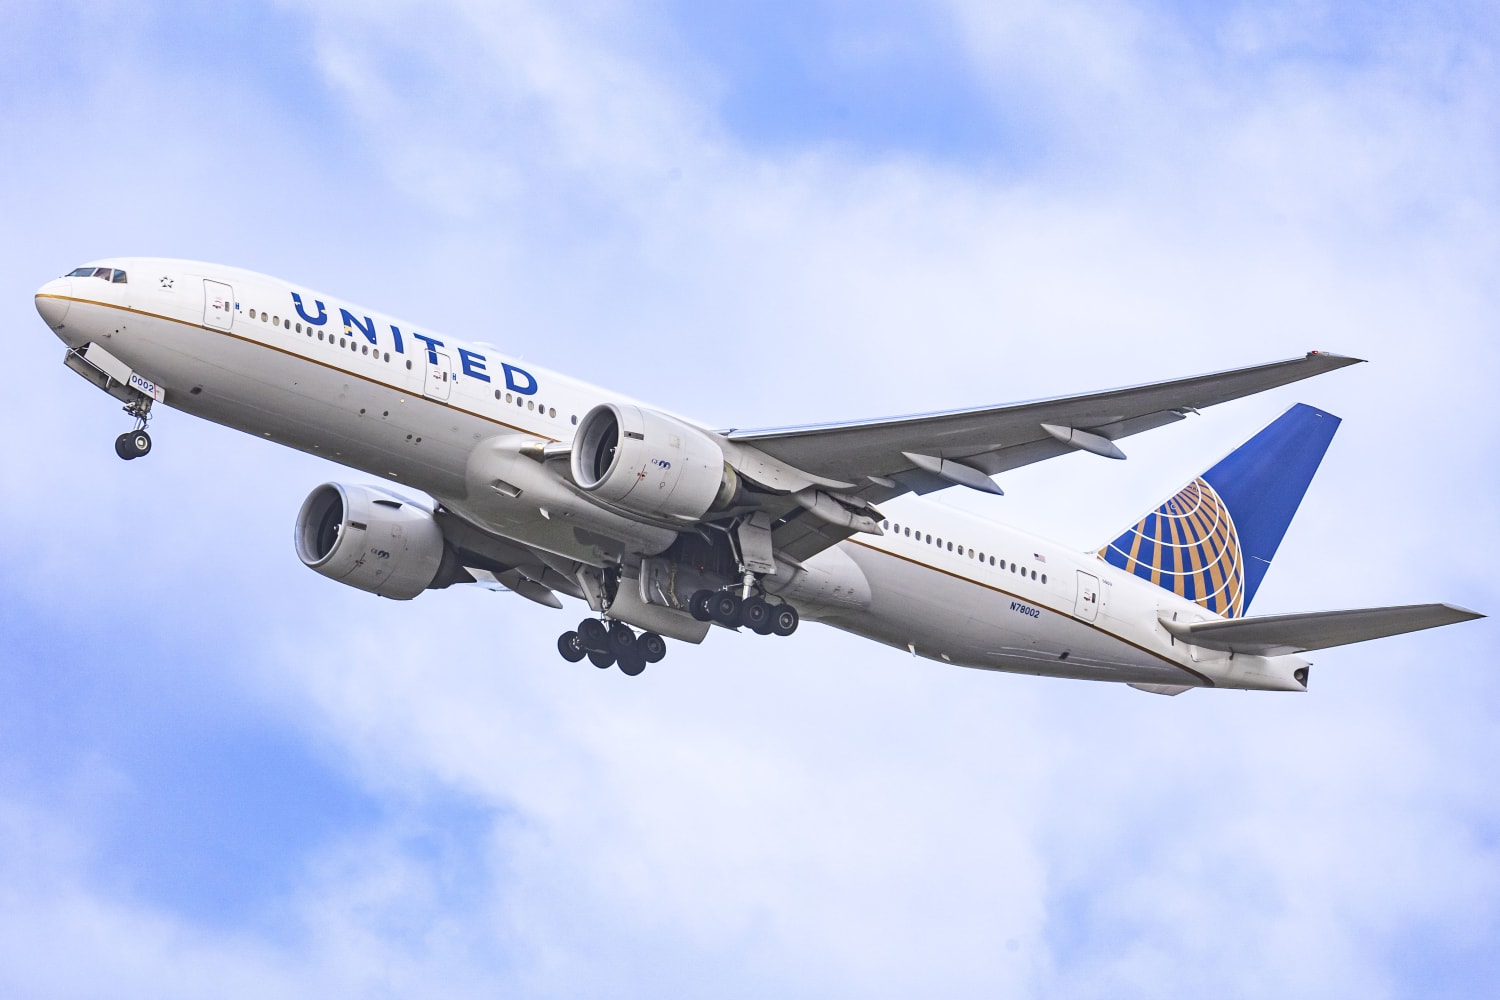 United Airlines plane taking off from Maui plunged to within 800 feet of the Pacific Ocean, flight data shows